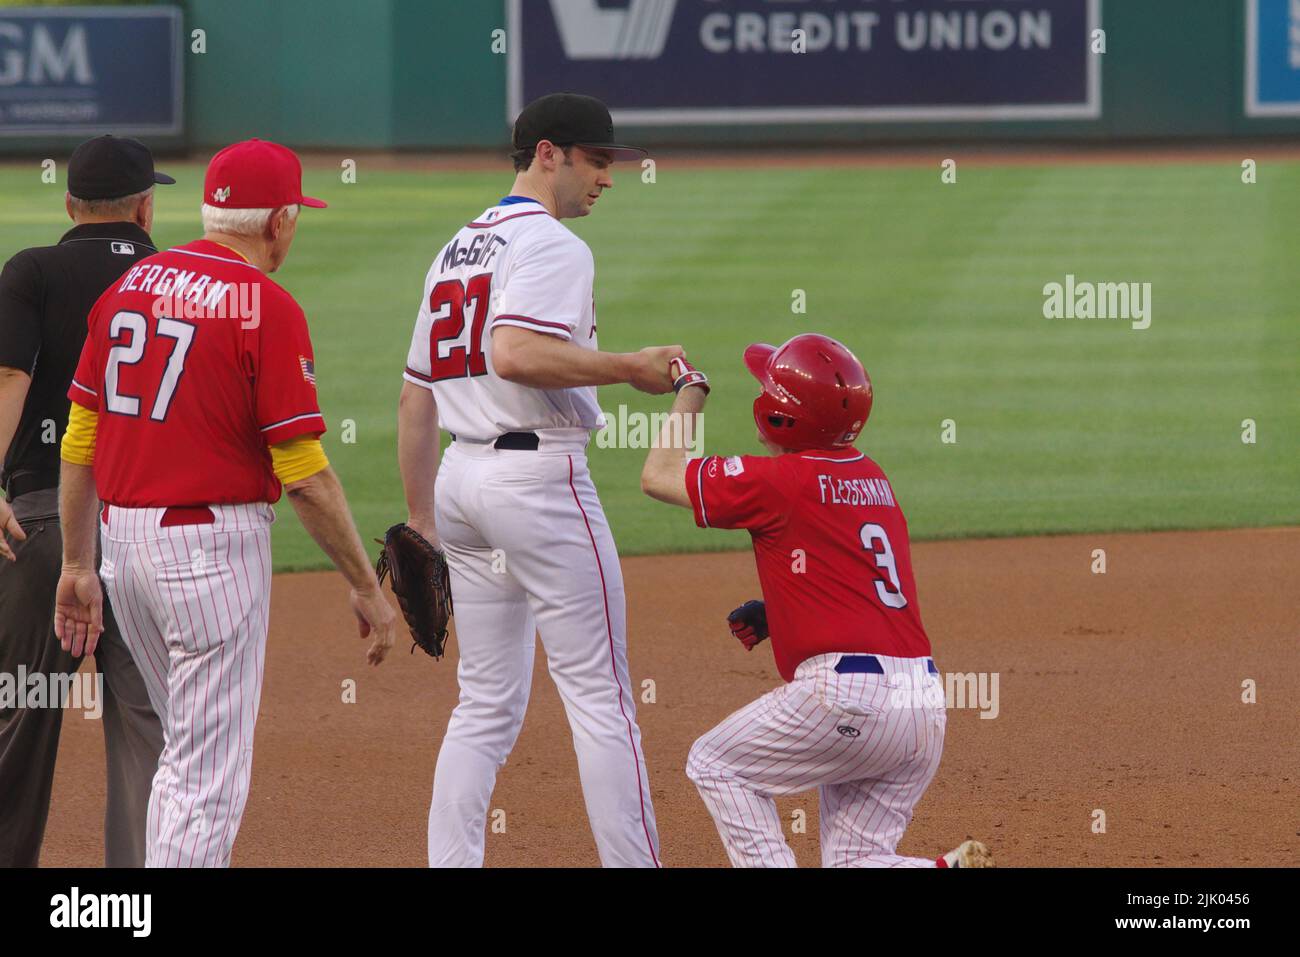 Washington, DC, USA. 28th July, 2022. U.S. Sen. Jon Ossoff (D-Ga.) helps Rep. Chuck Fleischmann (R-Tenn.) at third base as Rep. Jack Bergman (R-Mich.) looks on during the 2022 Congressional Baseball Game at Nationals Park. The Republicans beat the Democrats 9-0 in the annual game for charity. Credit: Philip Yabut/Alamy Live News Stock Photo